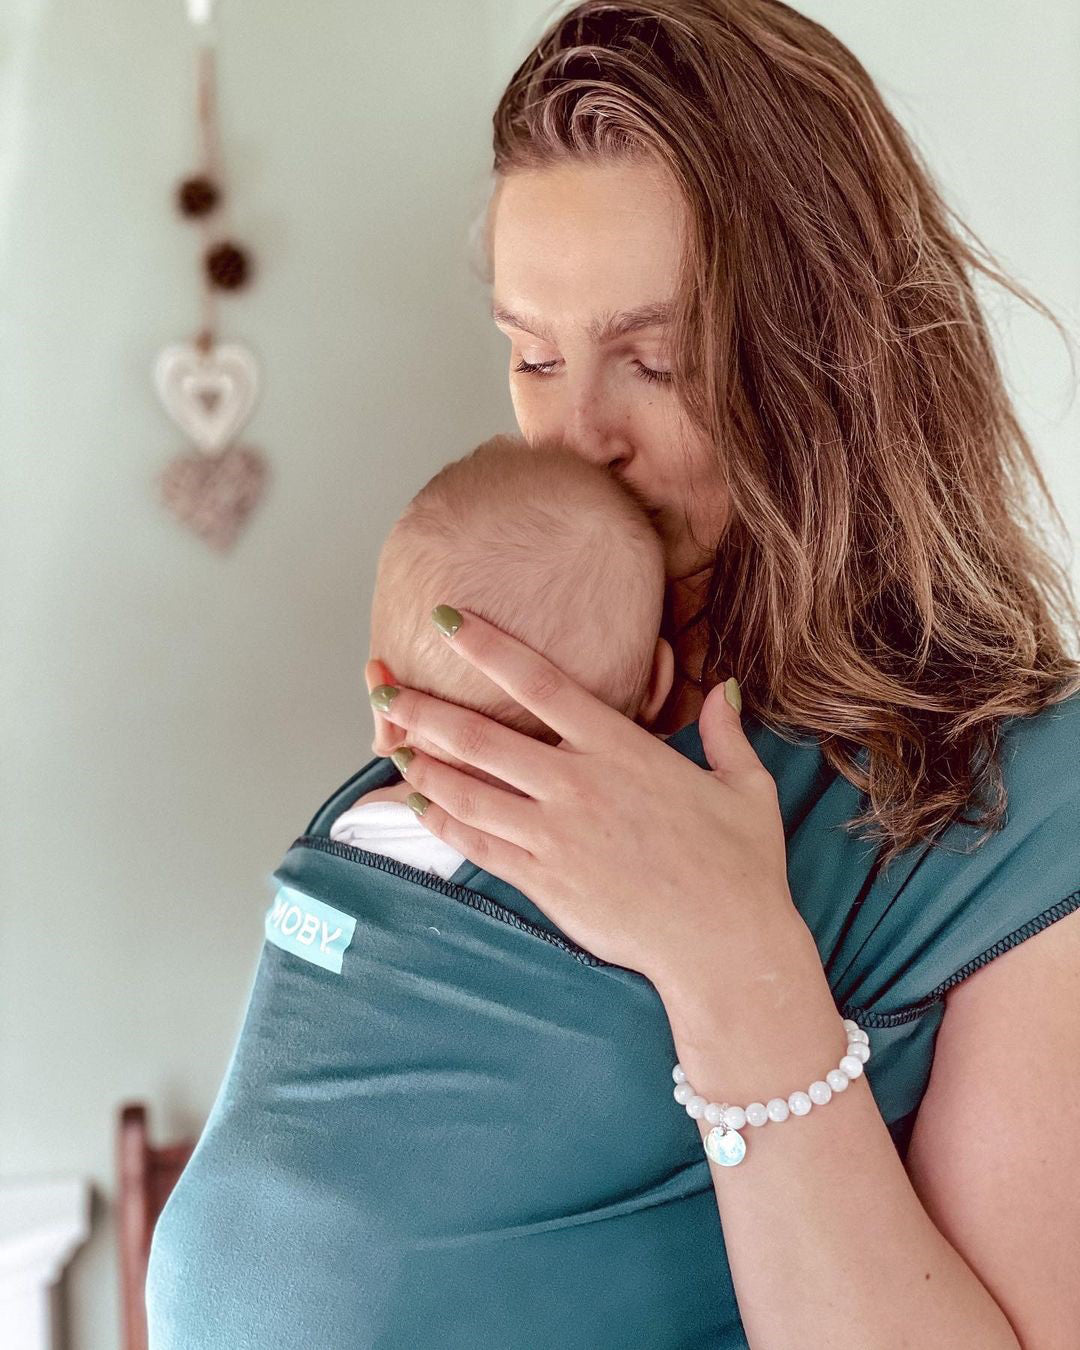 Zoe, North Ireland: "My Aska Maternity bracelet has given me a middle ground"